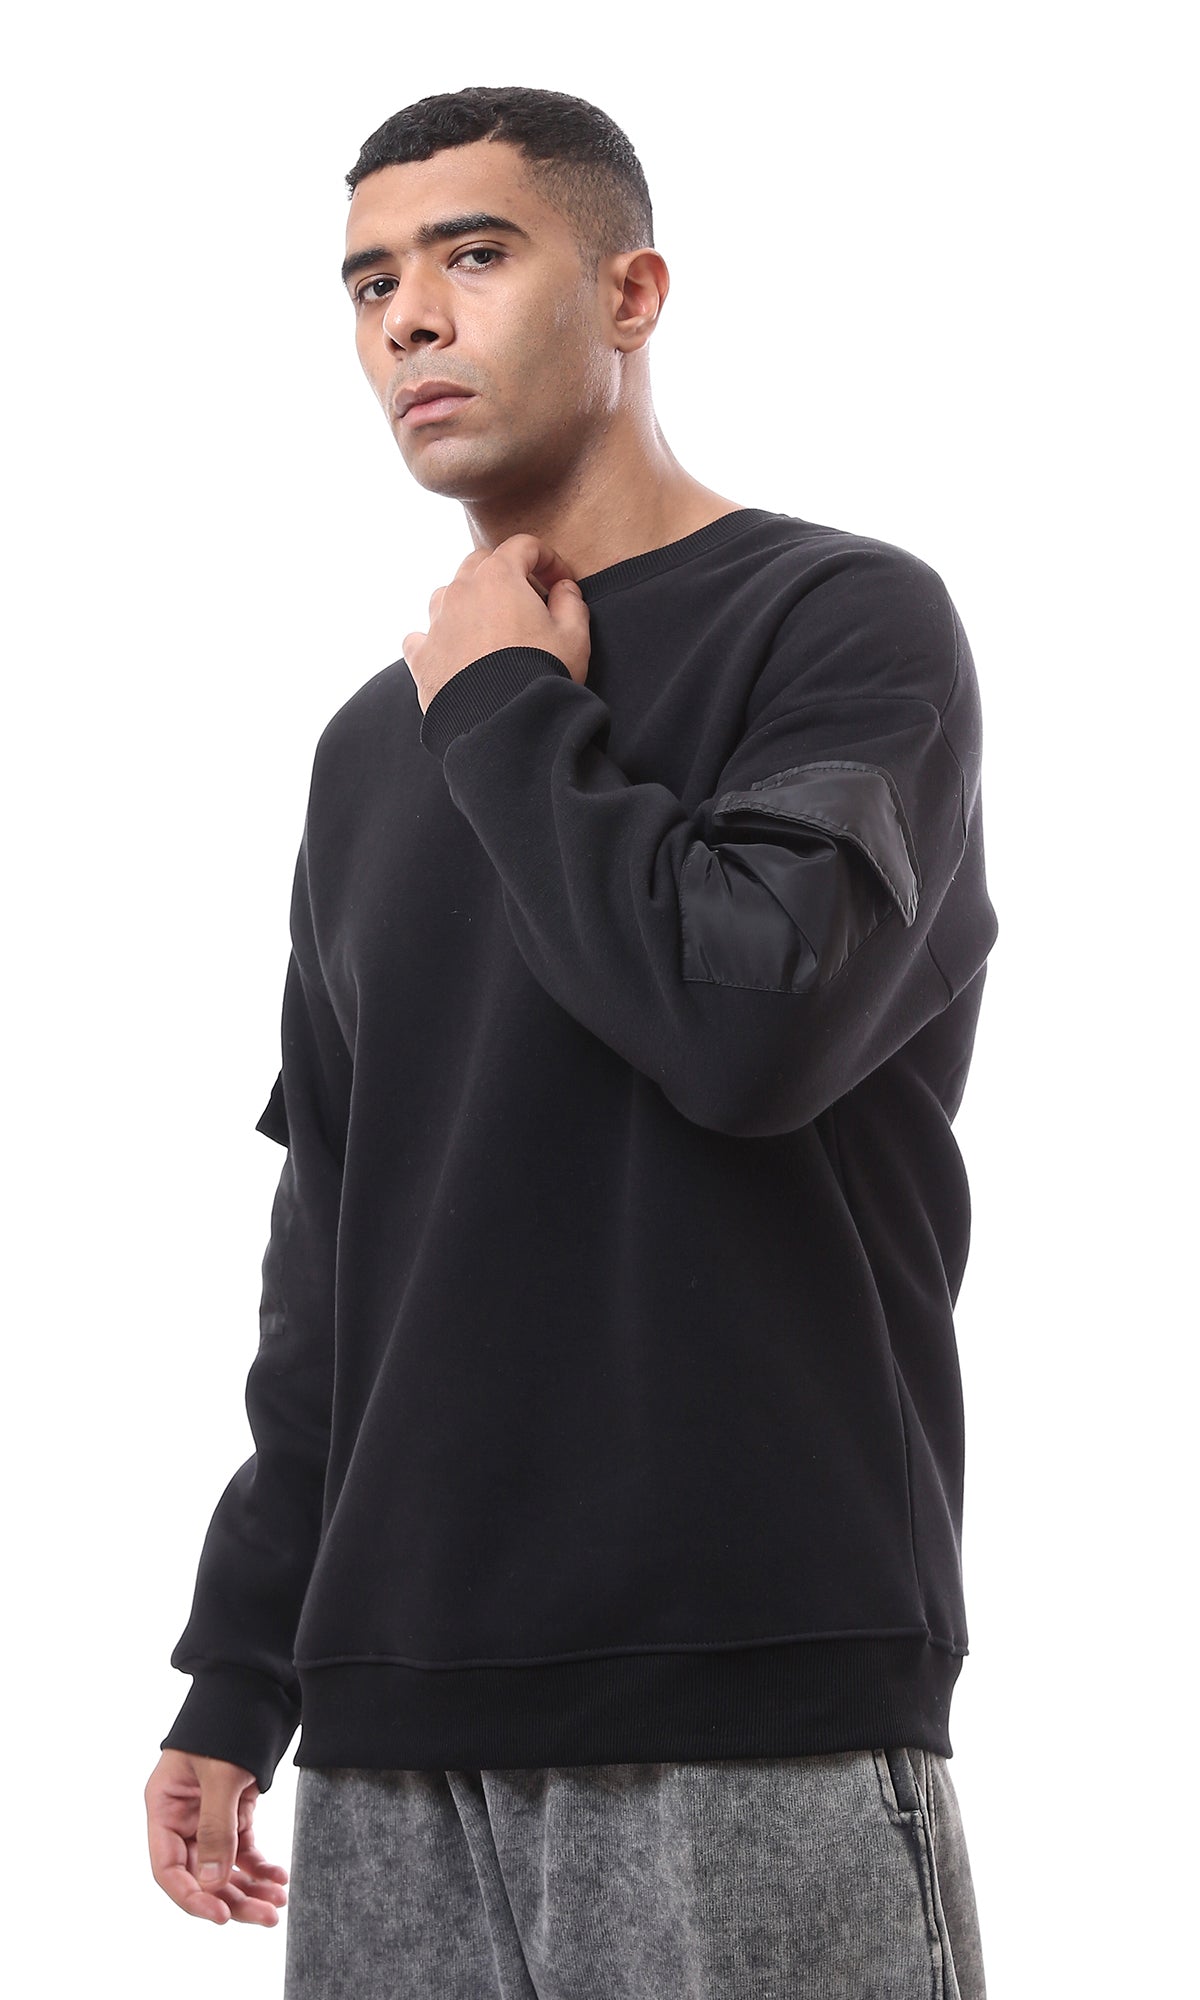 O175782 Black Sweatshirt With Patched Pockets On Sleeves